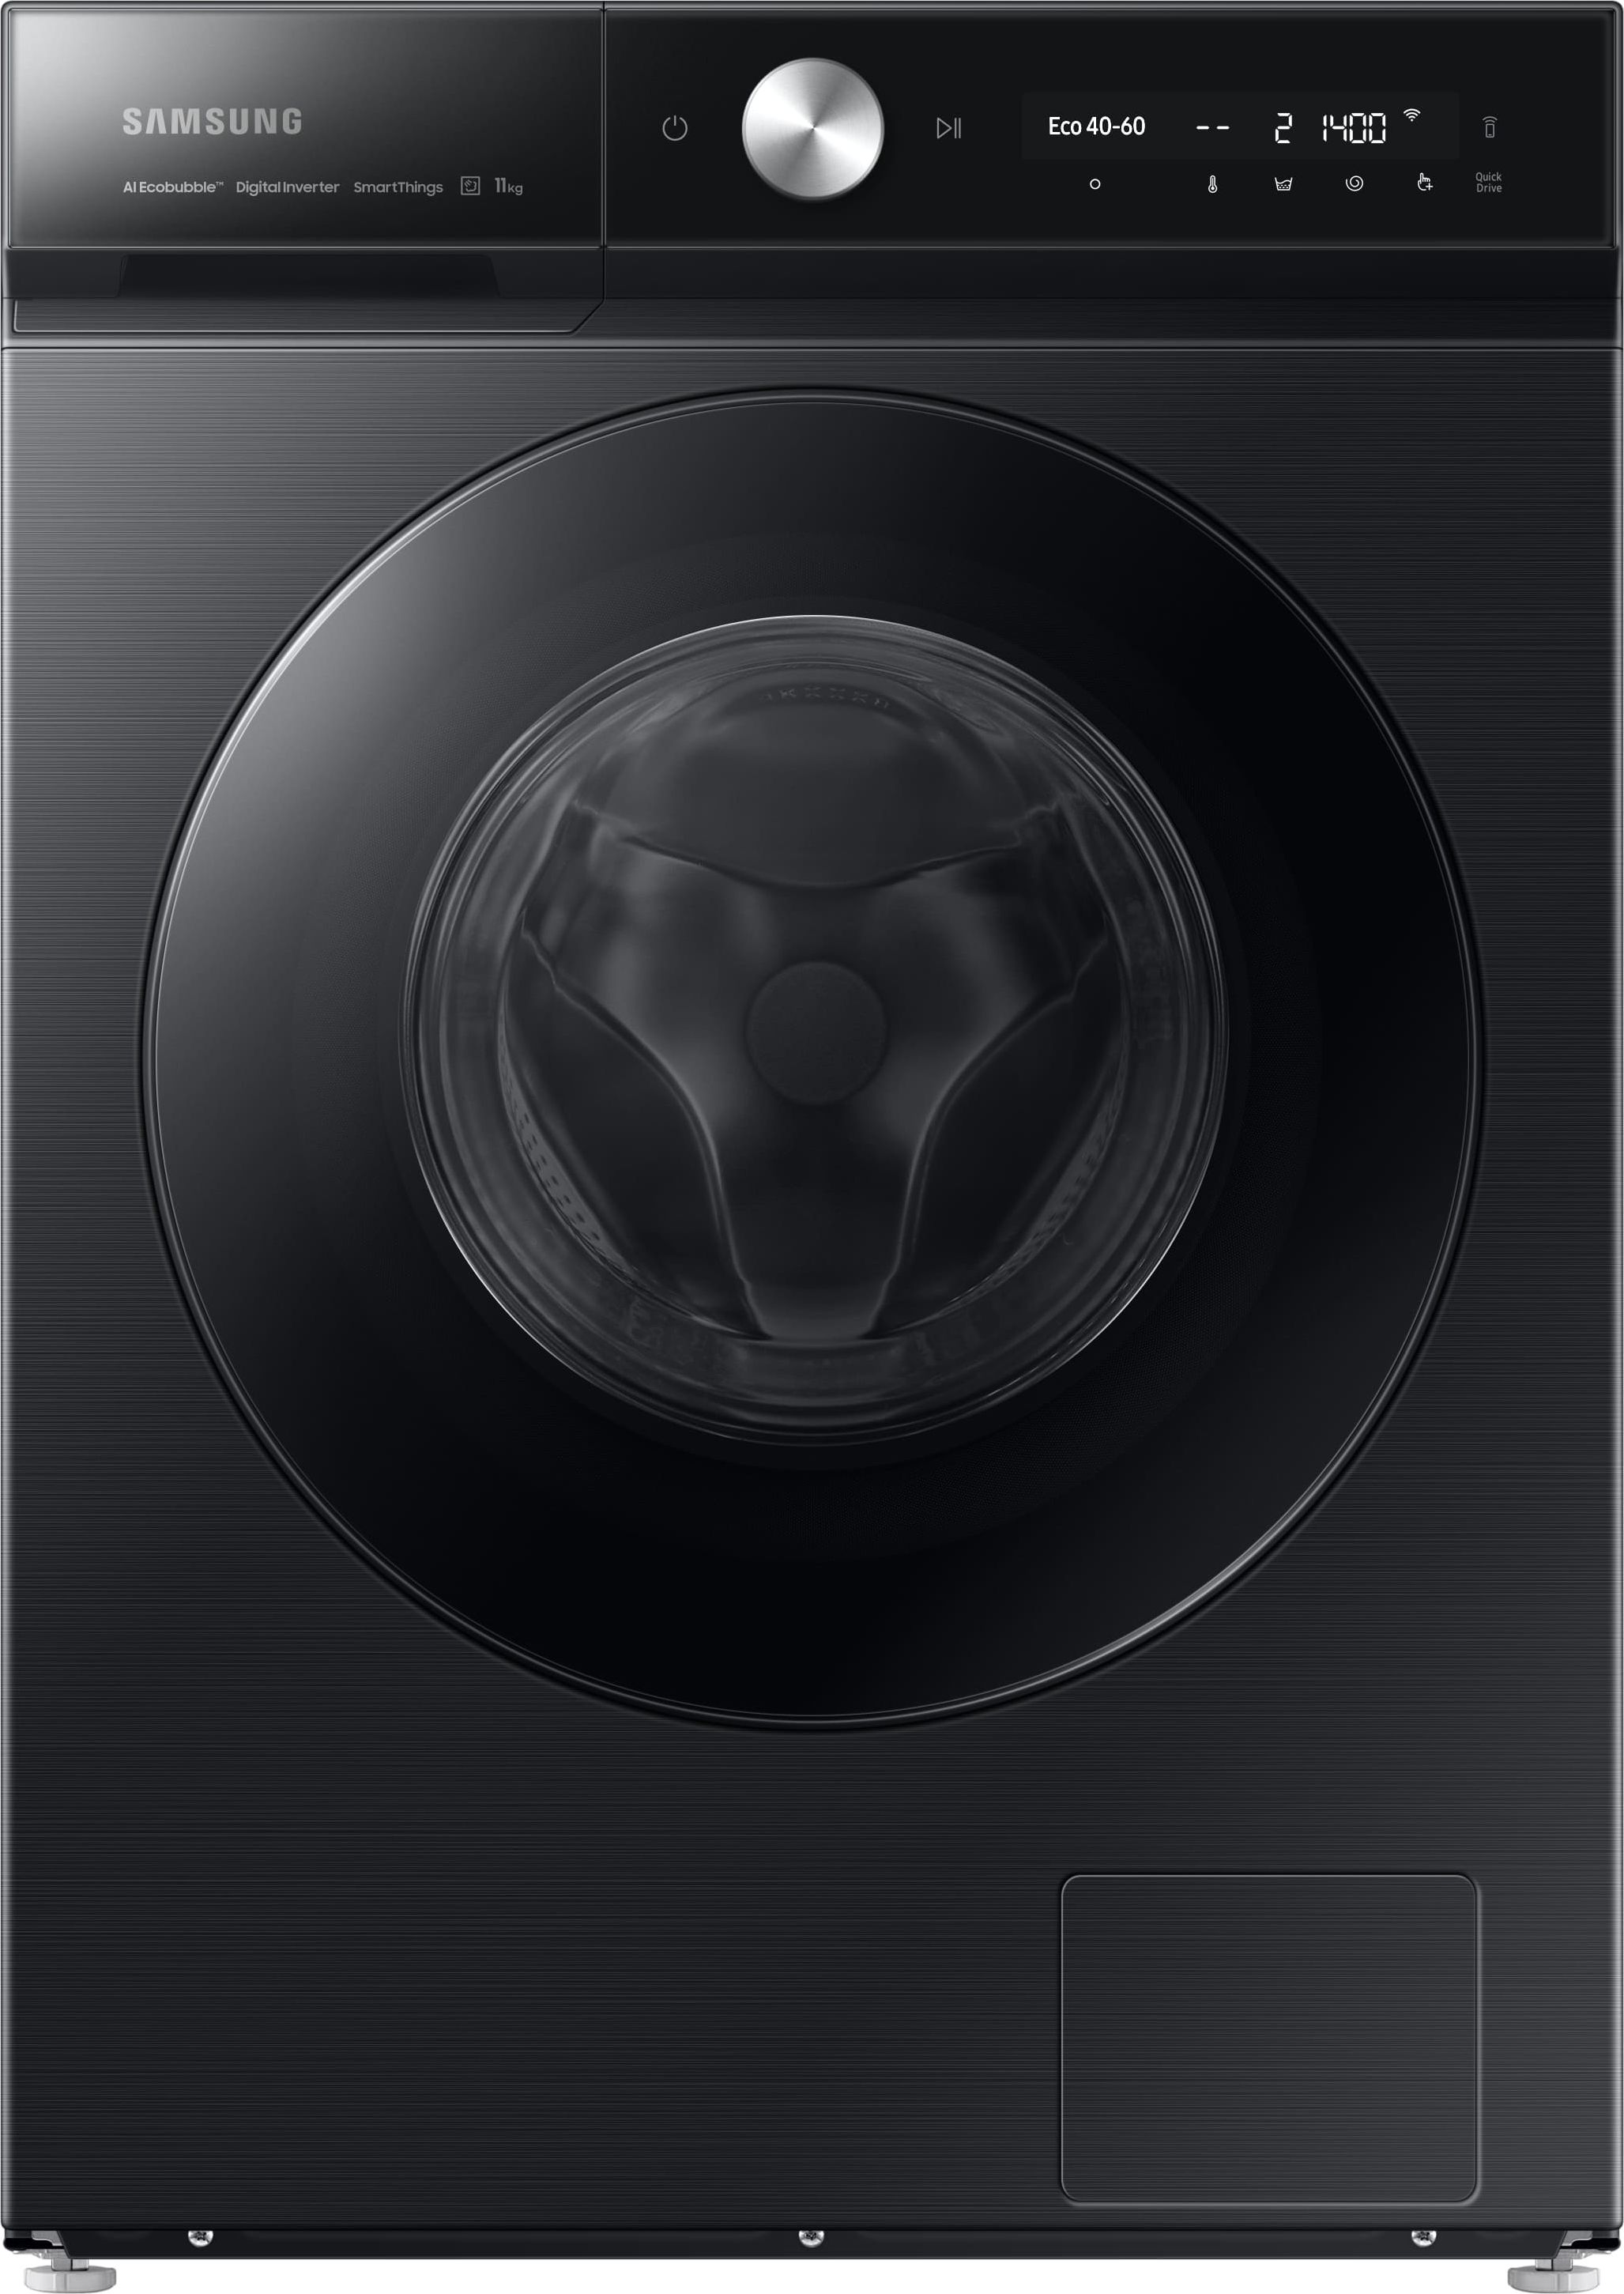 Samsung Series 8 QuickDrive SpaceMax WW11BB944DGB 11kg Washing Machine with 1400 rpm - Black - A Rated Black